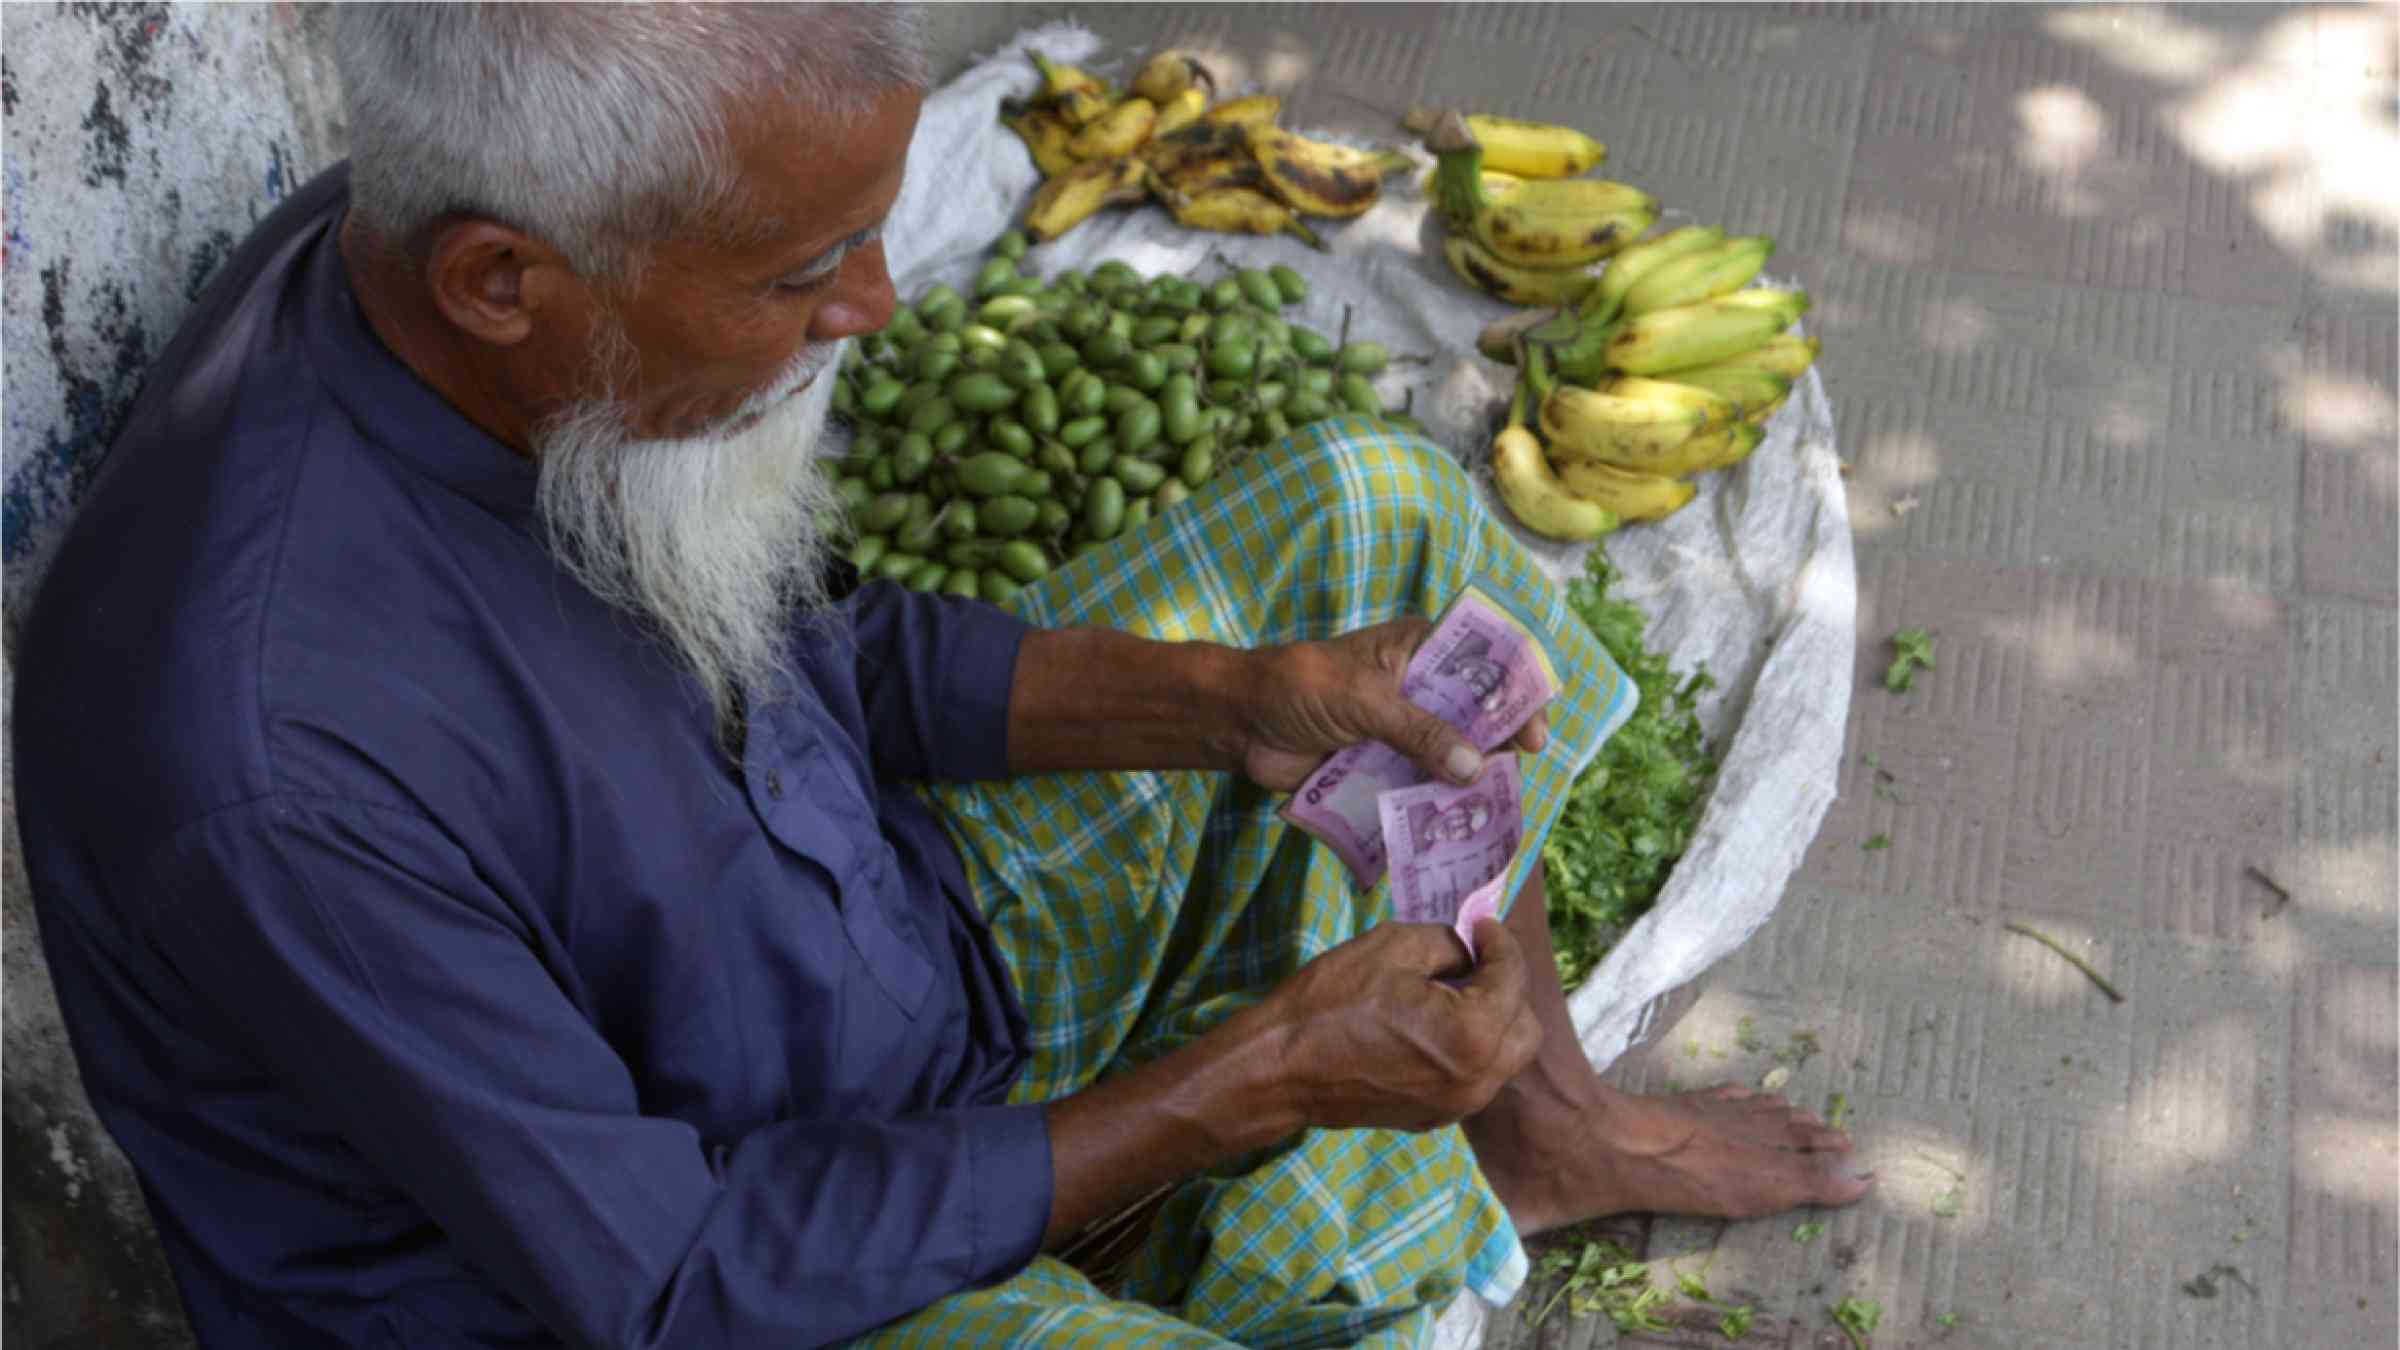 Asian old man with white beard sales fruit in the streets to earn money.